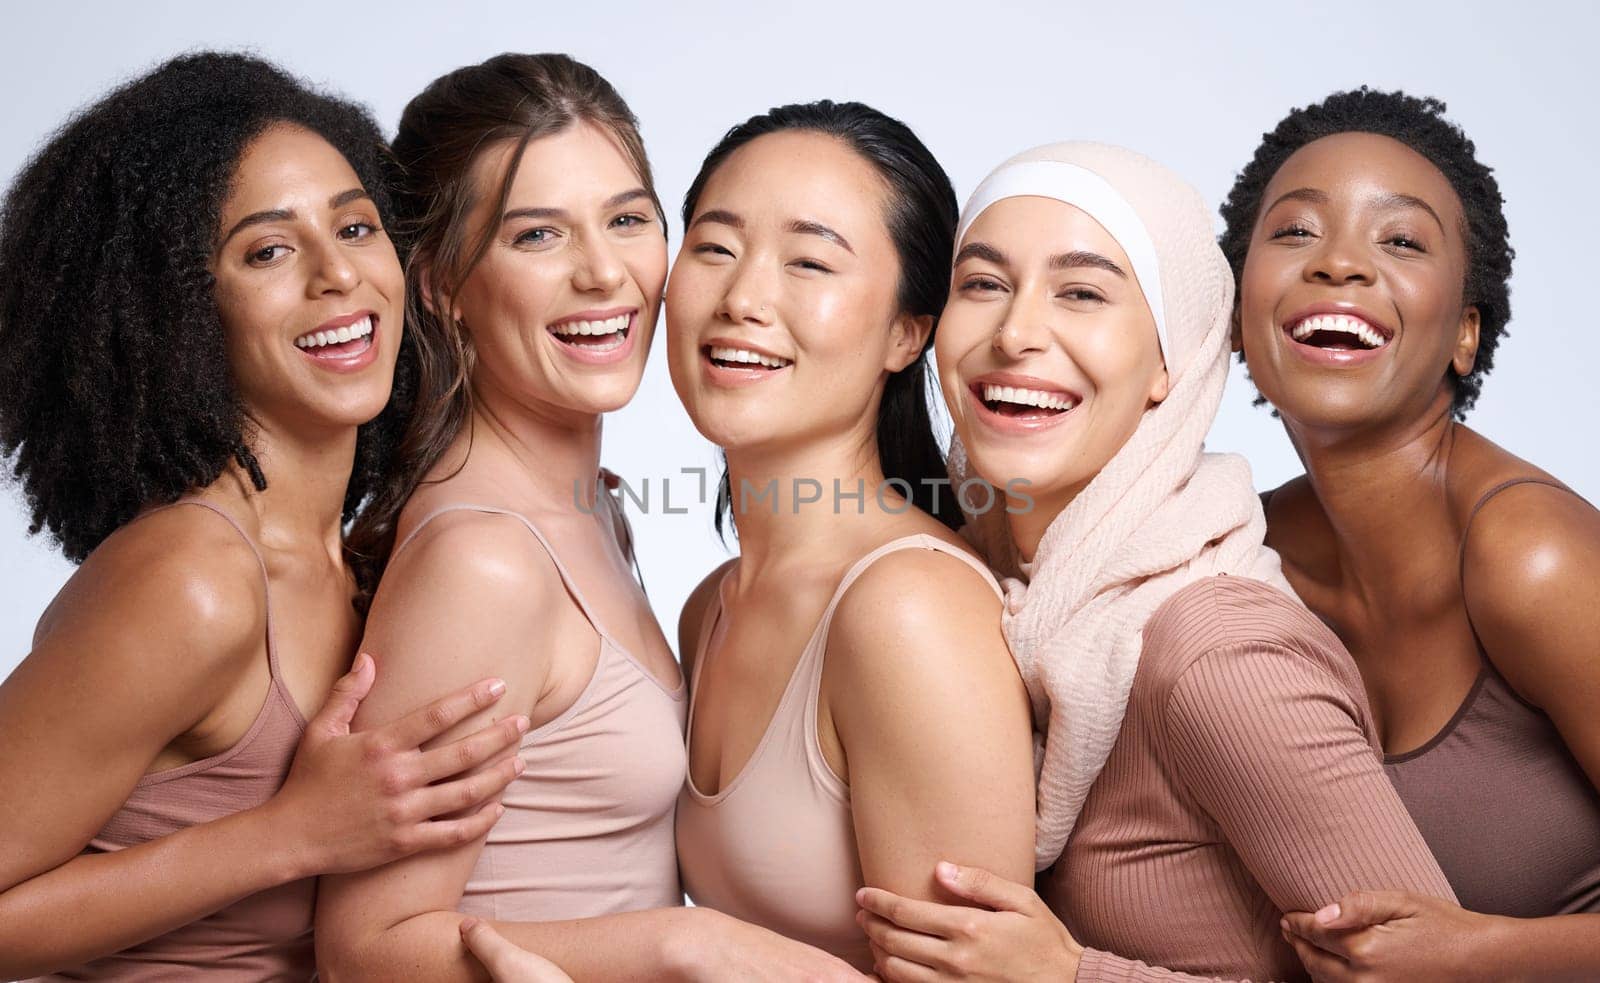 Portrait, beauty and diversity with woman friends in studio on a gray background together for inclusion. Happy, smile and solidarity with a model female group posing to promote real equality.